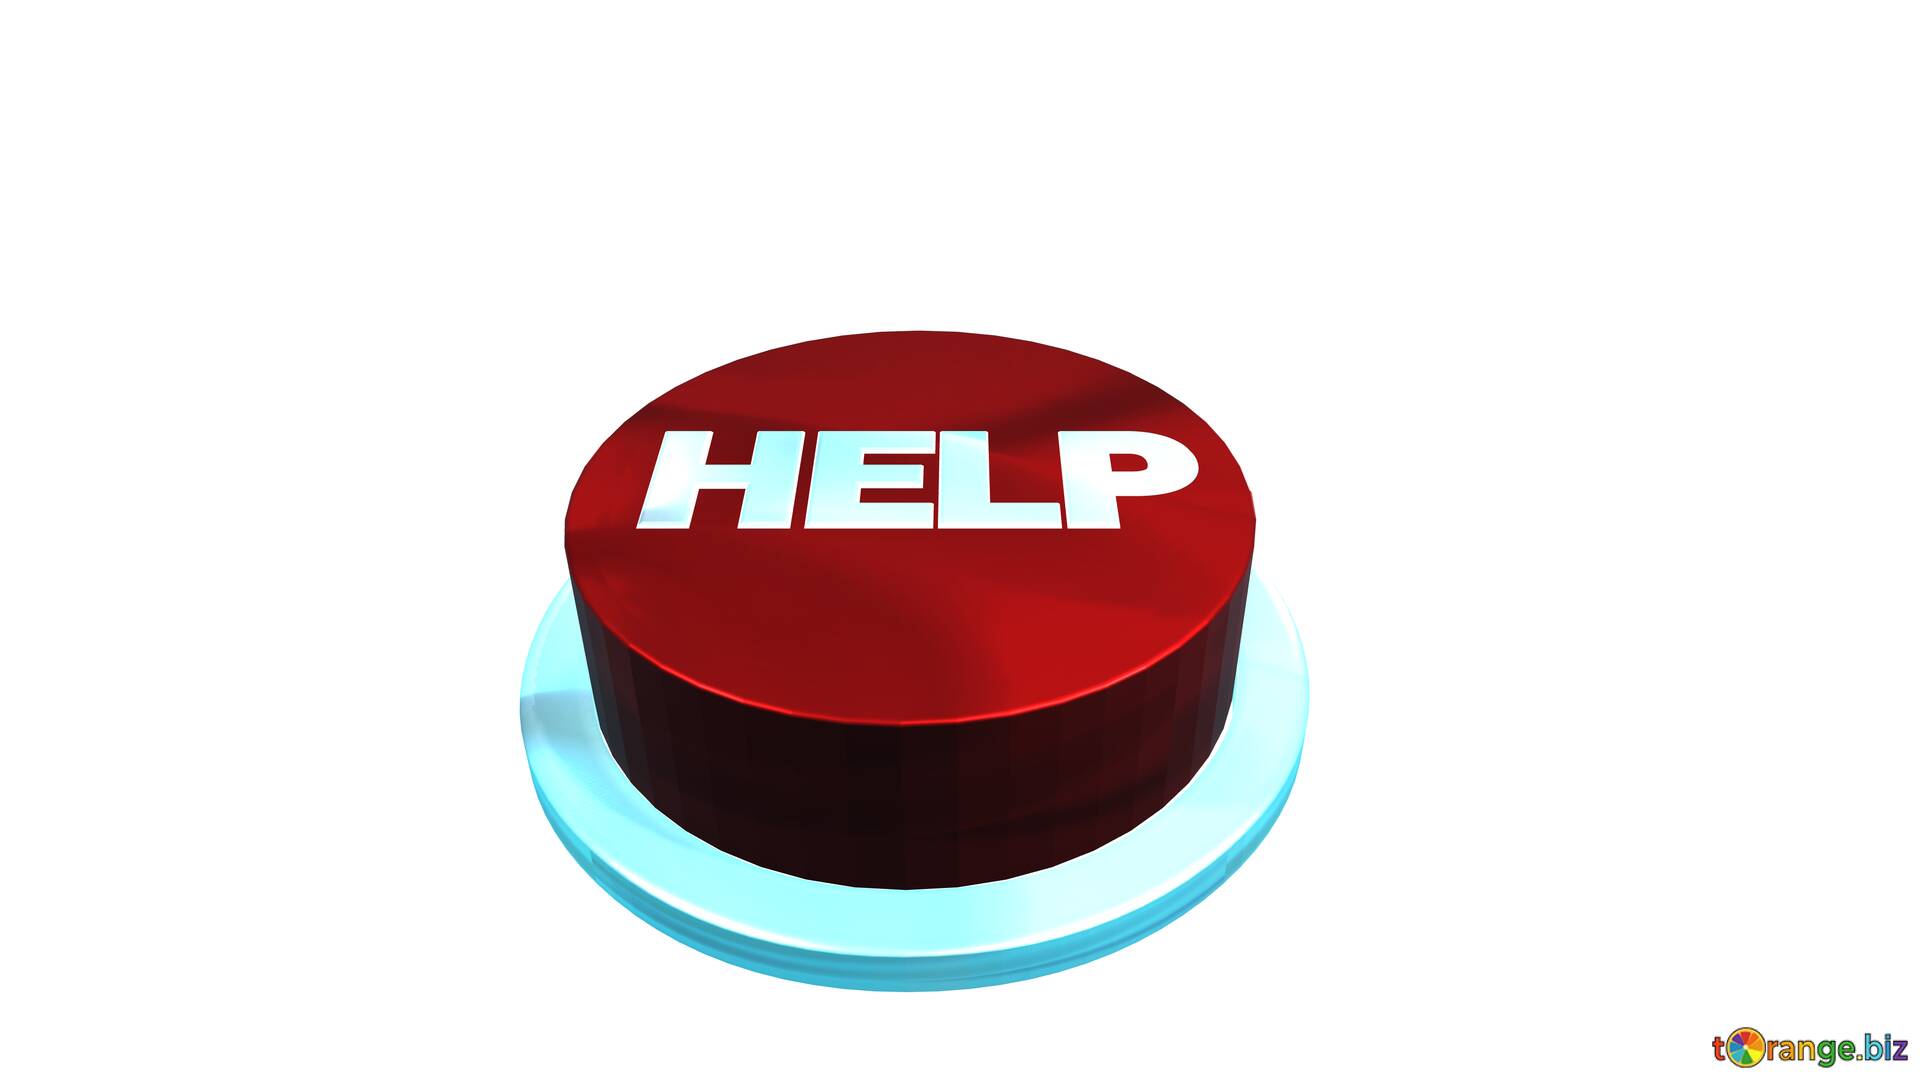 Red Button Clip Art - Red Button Image